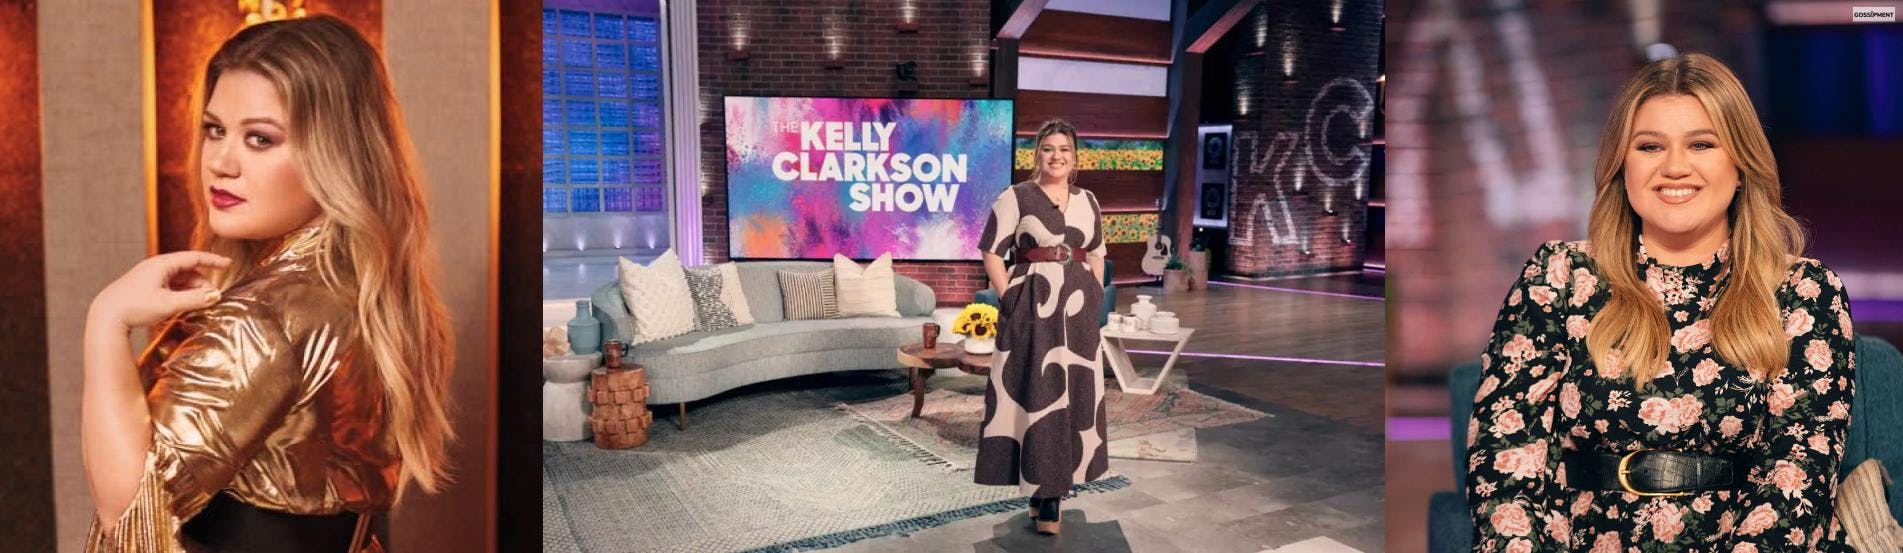 Cover Image for “The Kelly Clarkson Show” Wins Its Second Daytime Emmy In A Row